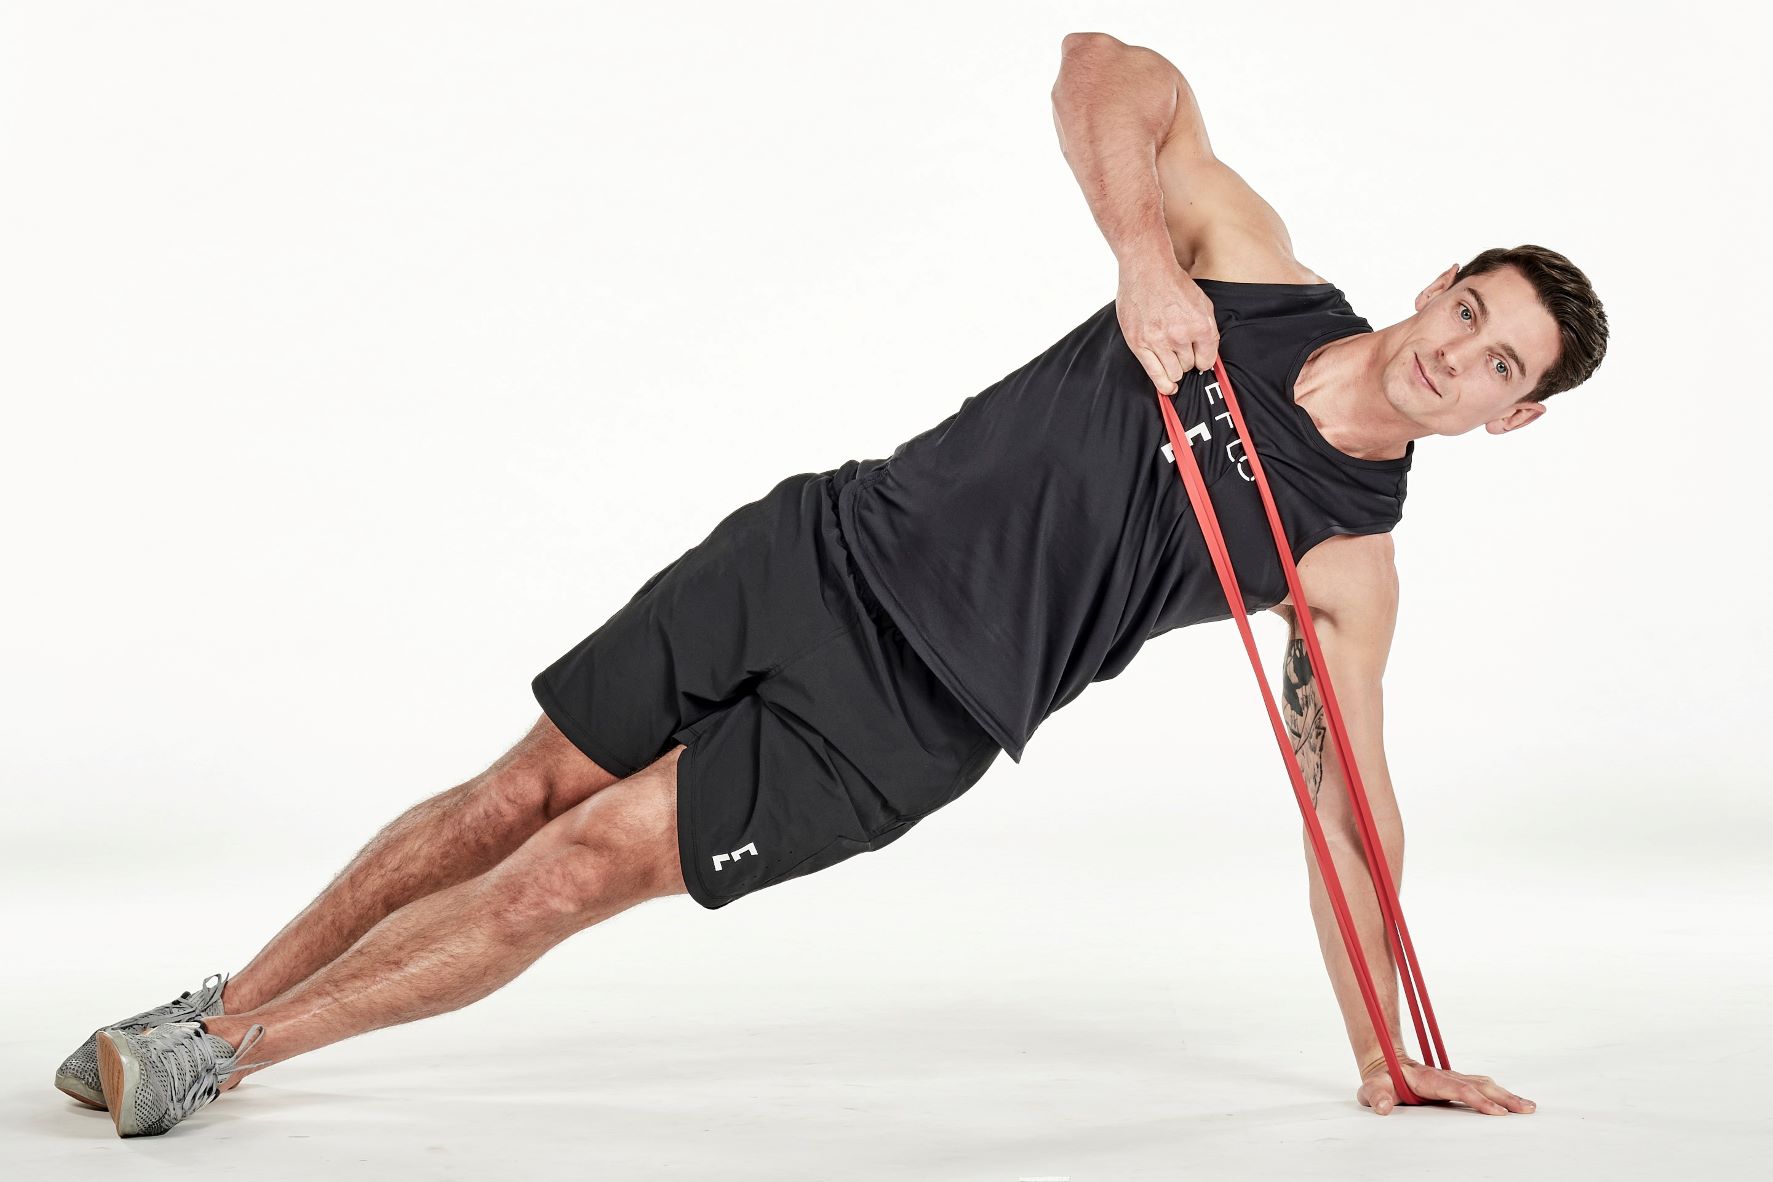 man demonstrating step two of side plank high pull; in a side plank position, his top hand holds a resistance band that is secured under his bottom hand on the floor; his top arm is bent as he pulls the band upwards; he wears a black fitness vest, black shorts and trainers